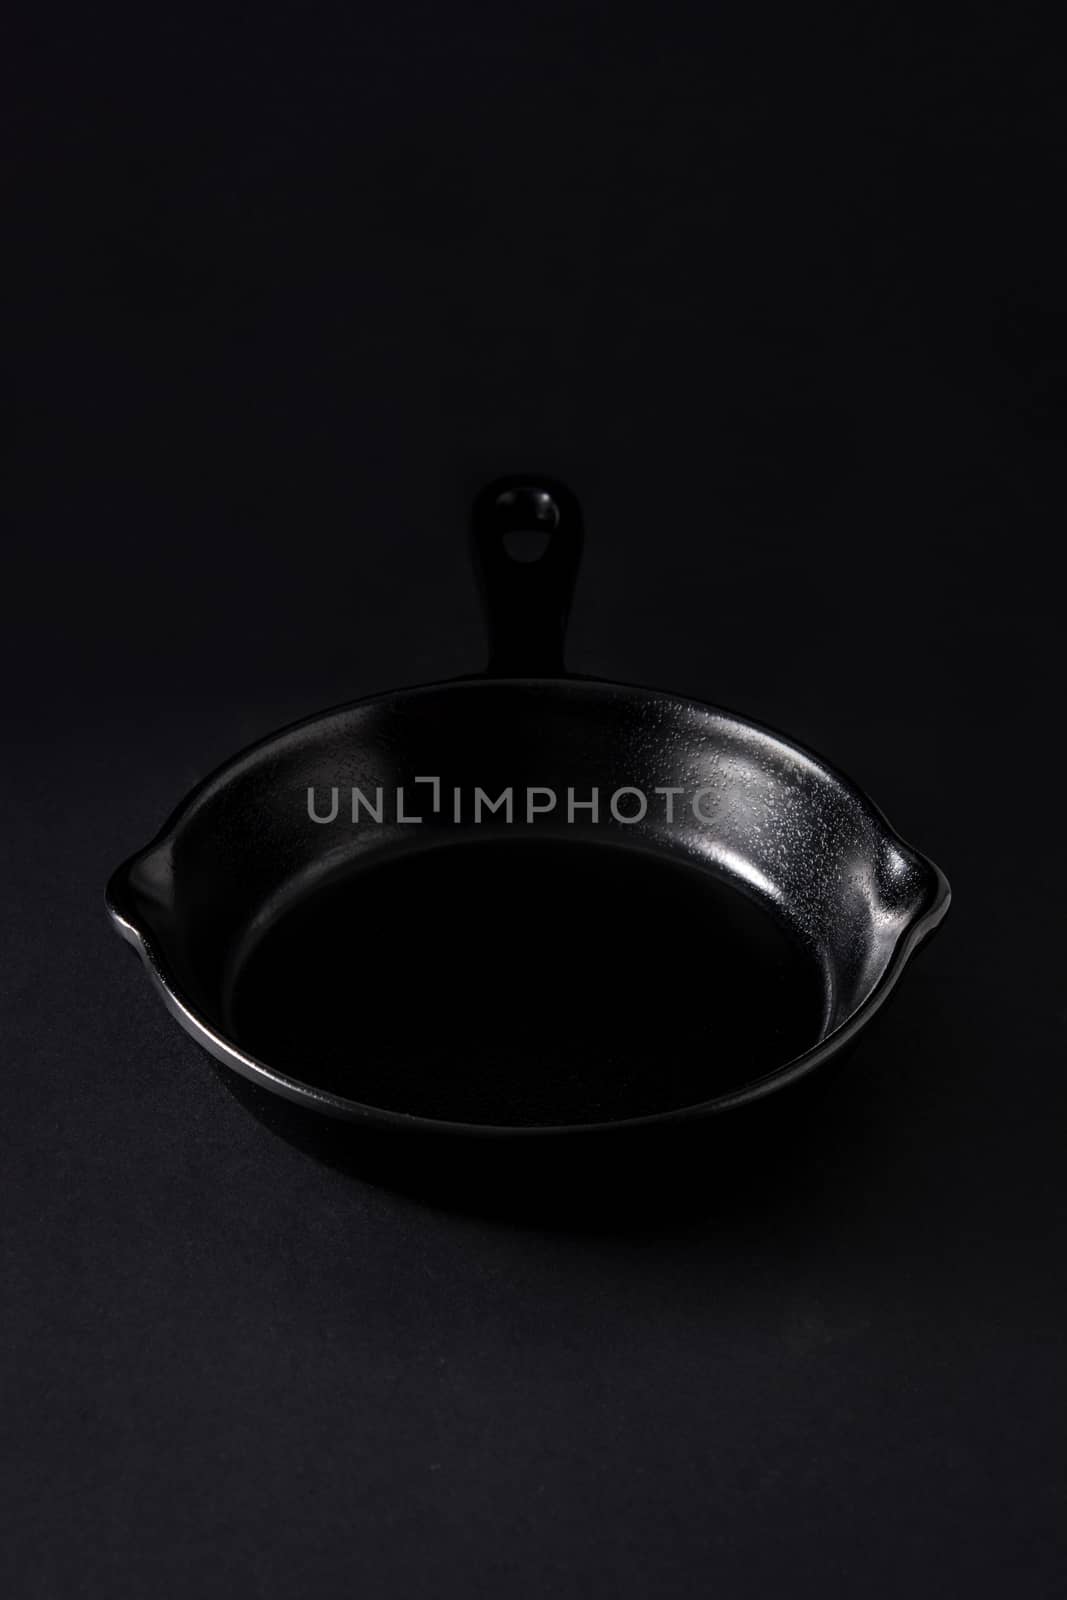 Empty black frying pan by chandlervid85